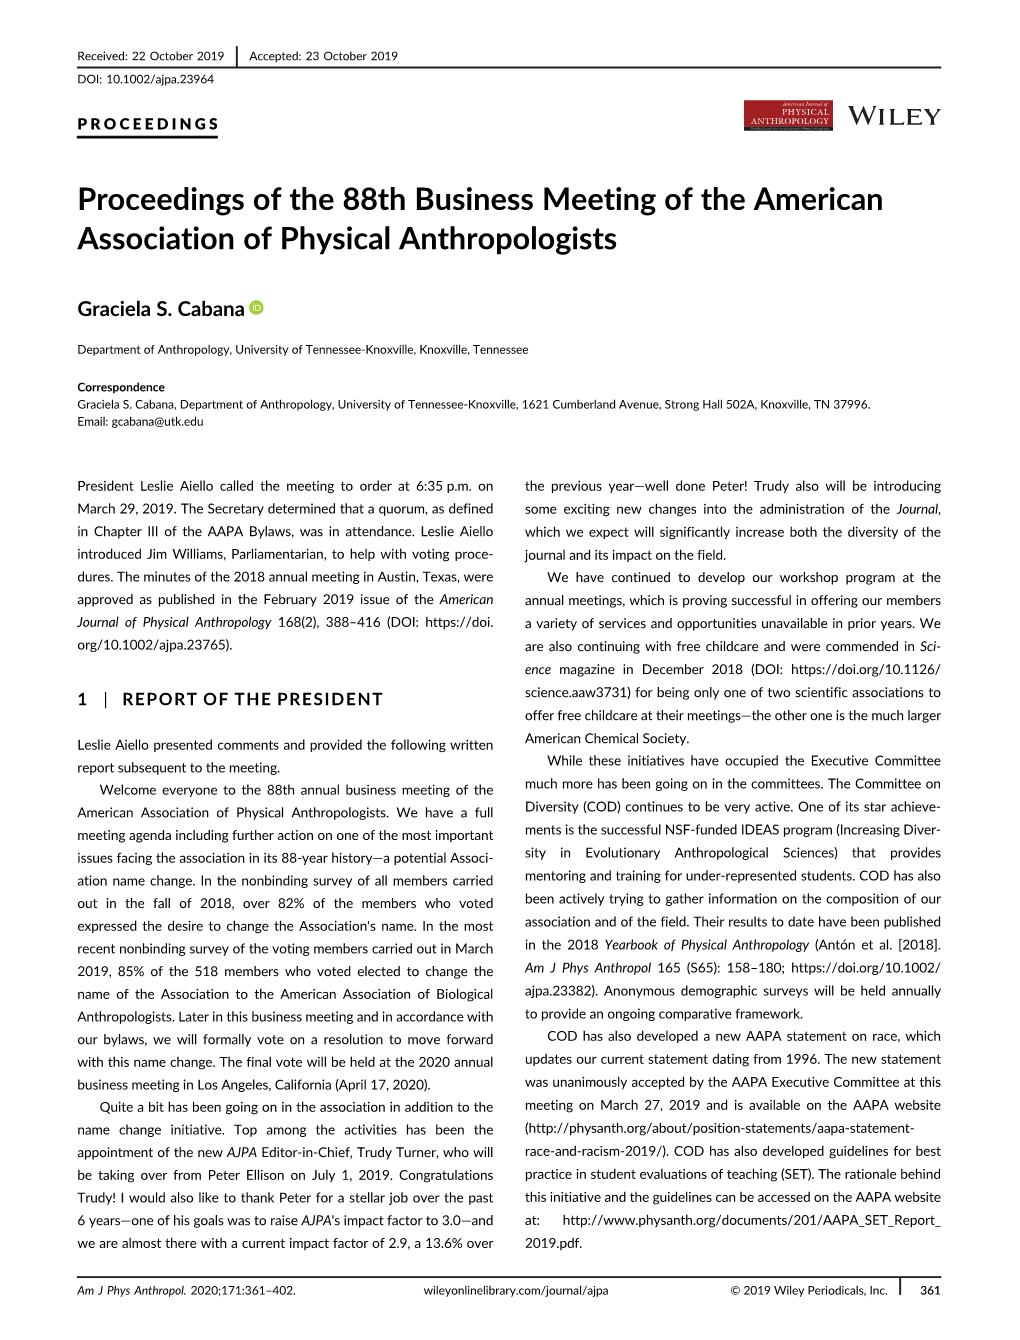 Proceedings of the 88Th Business Meeting of the American Association of Physical Anthropologists